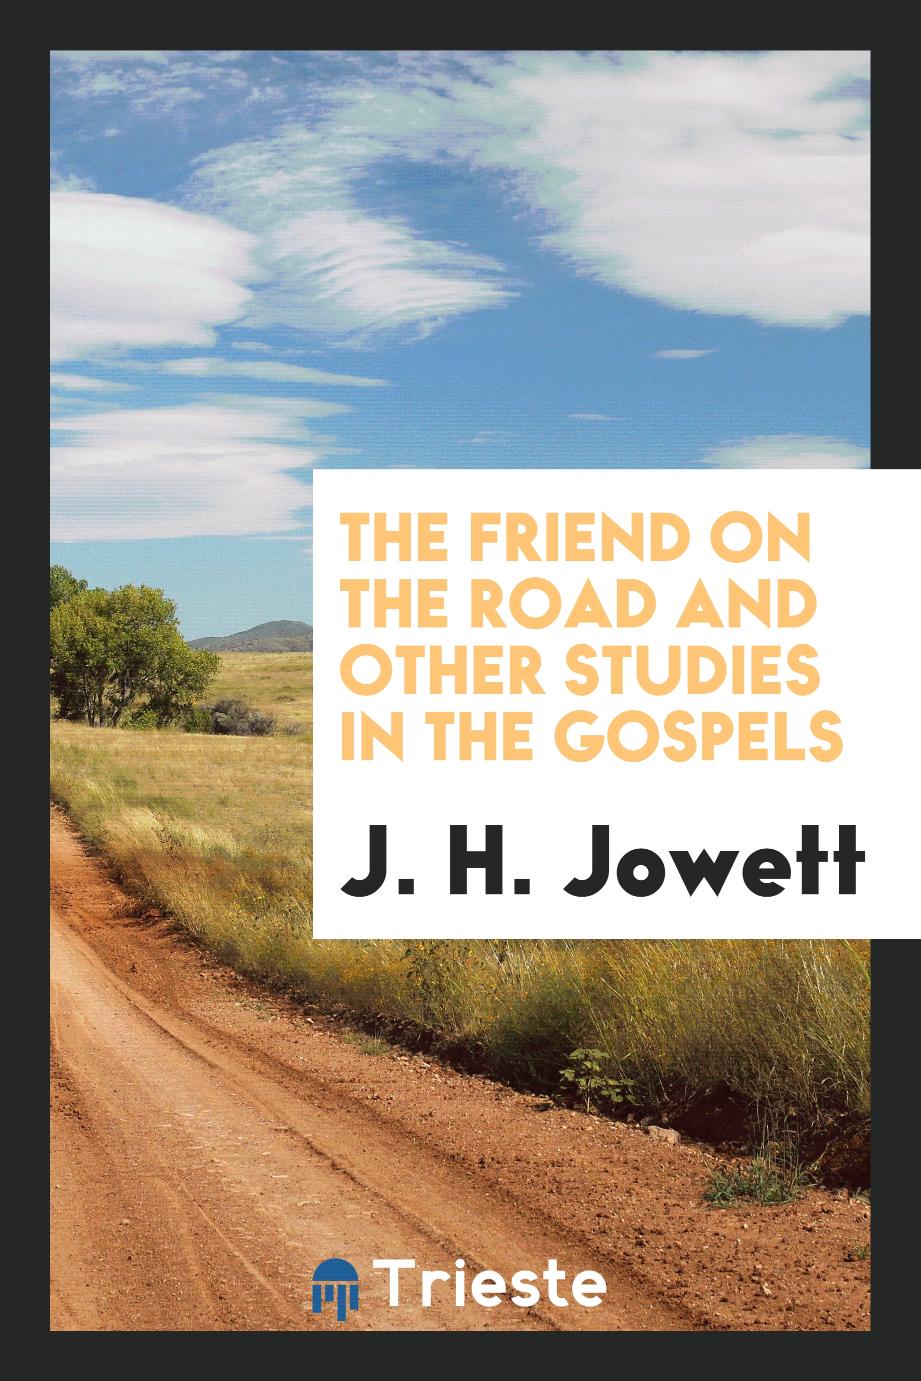 The Friend on the Road and Other Studies in the Gospels